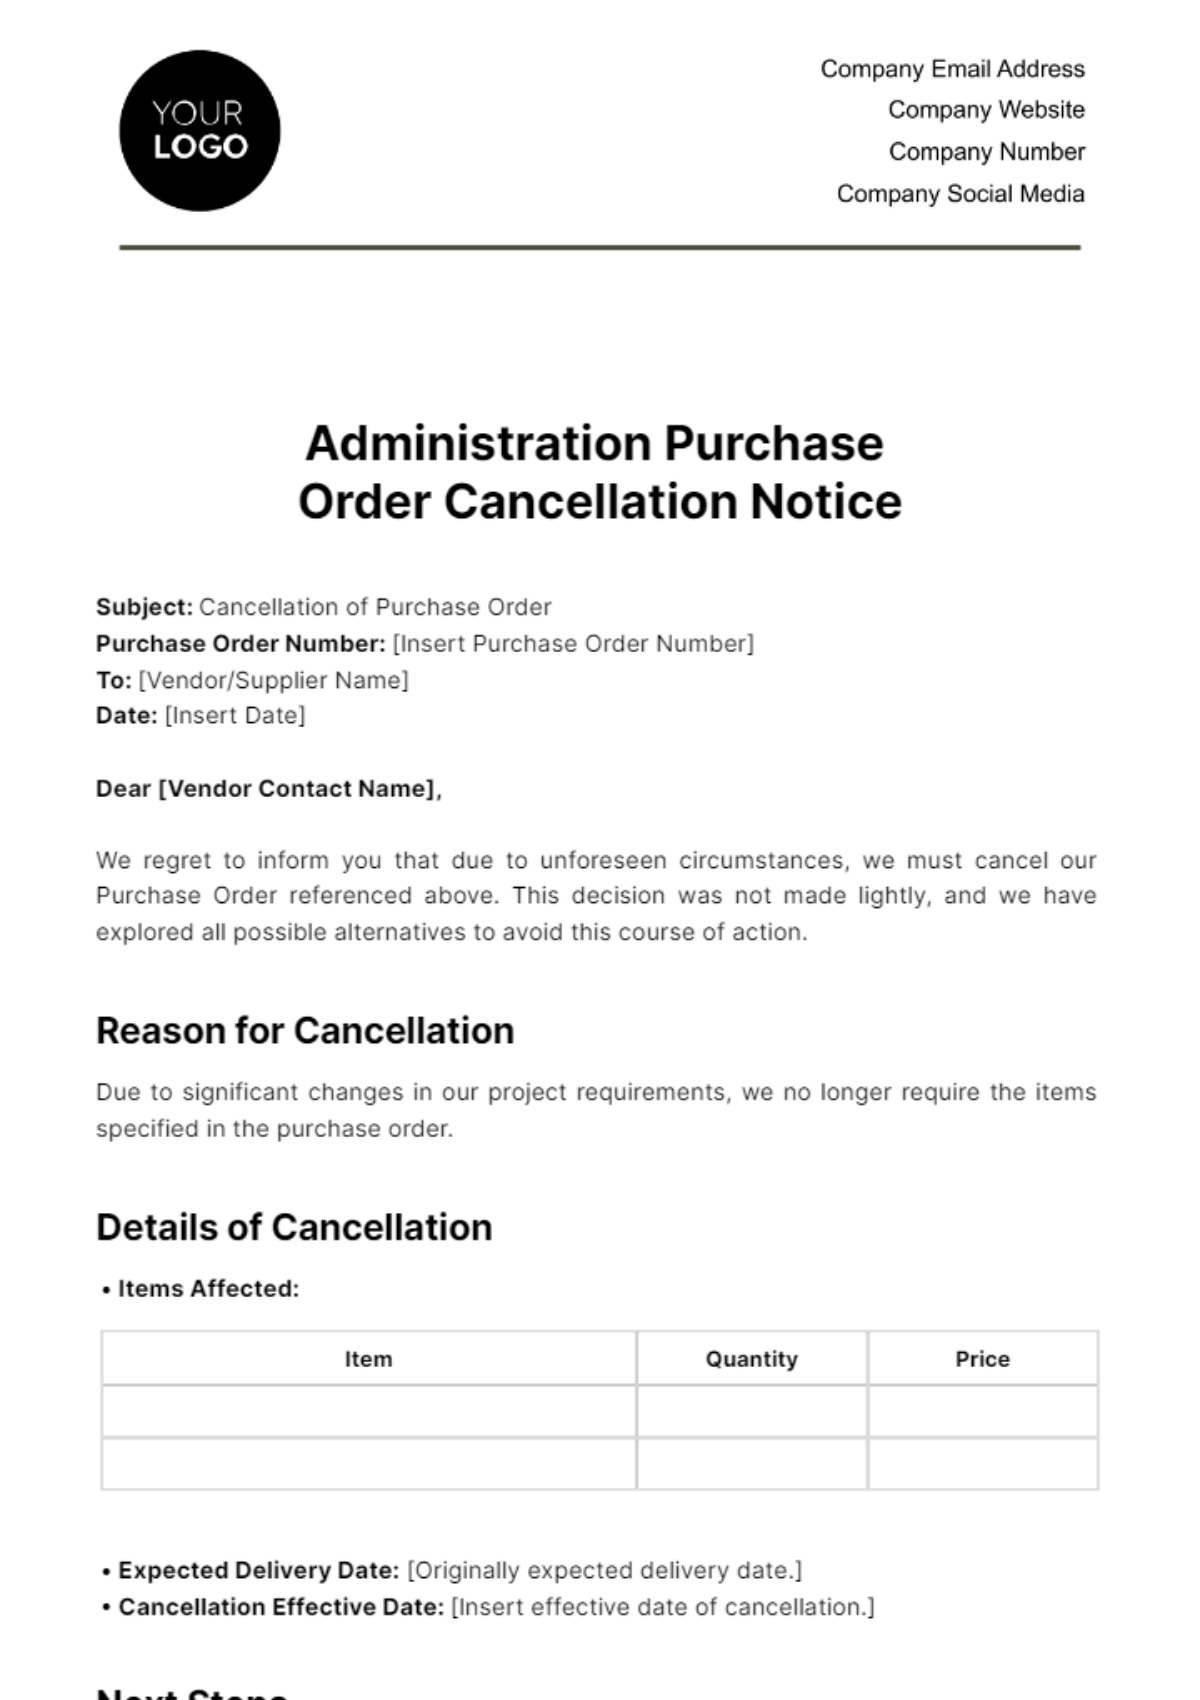 Administration Purchase Order Cancellation Notice Template